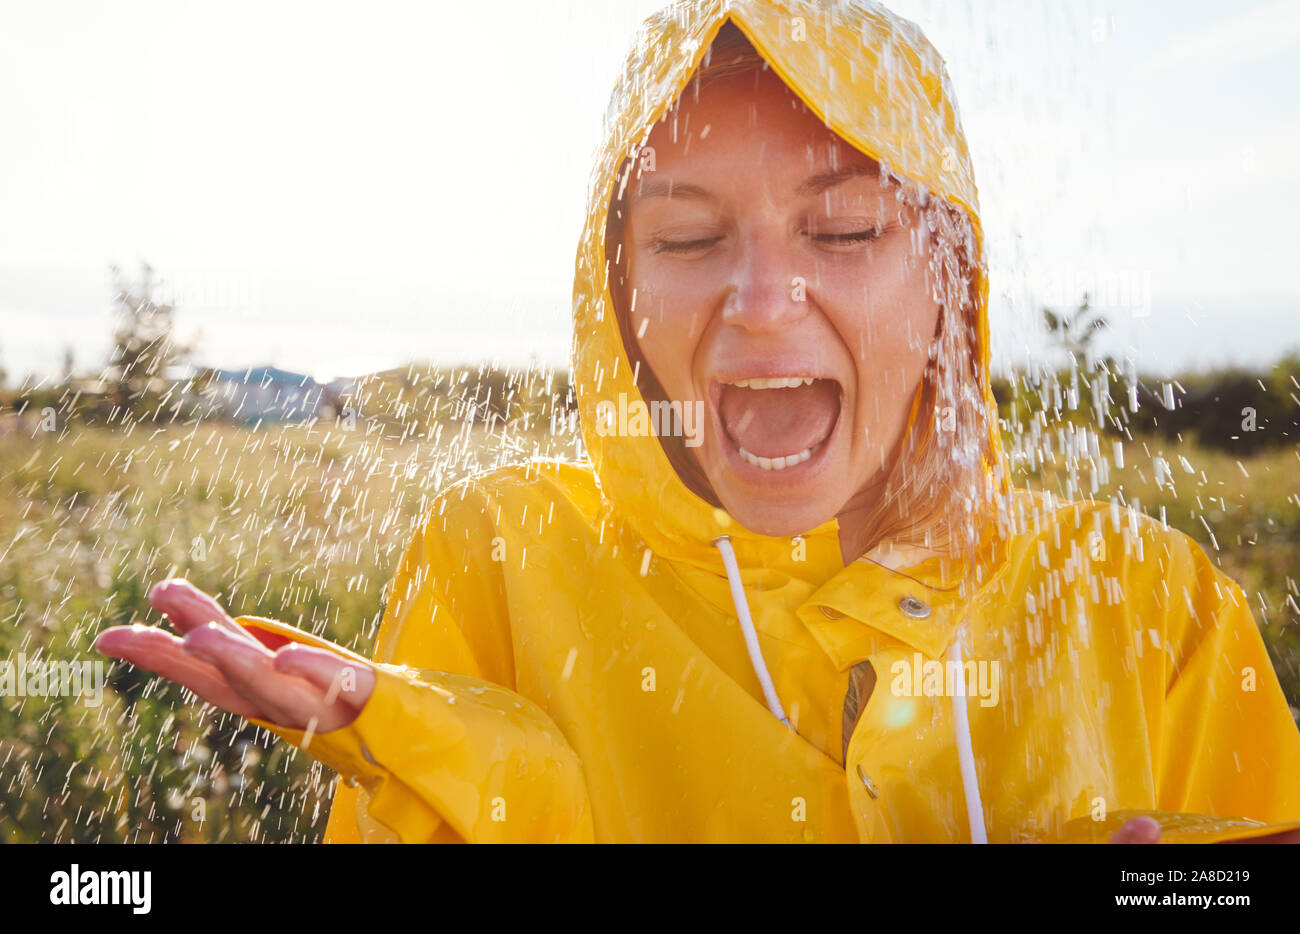 Unhappy Woman In Rain Wearing Waterproof Coat At Outdoor Music Festival  Stock Photo - Alamy